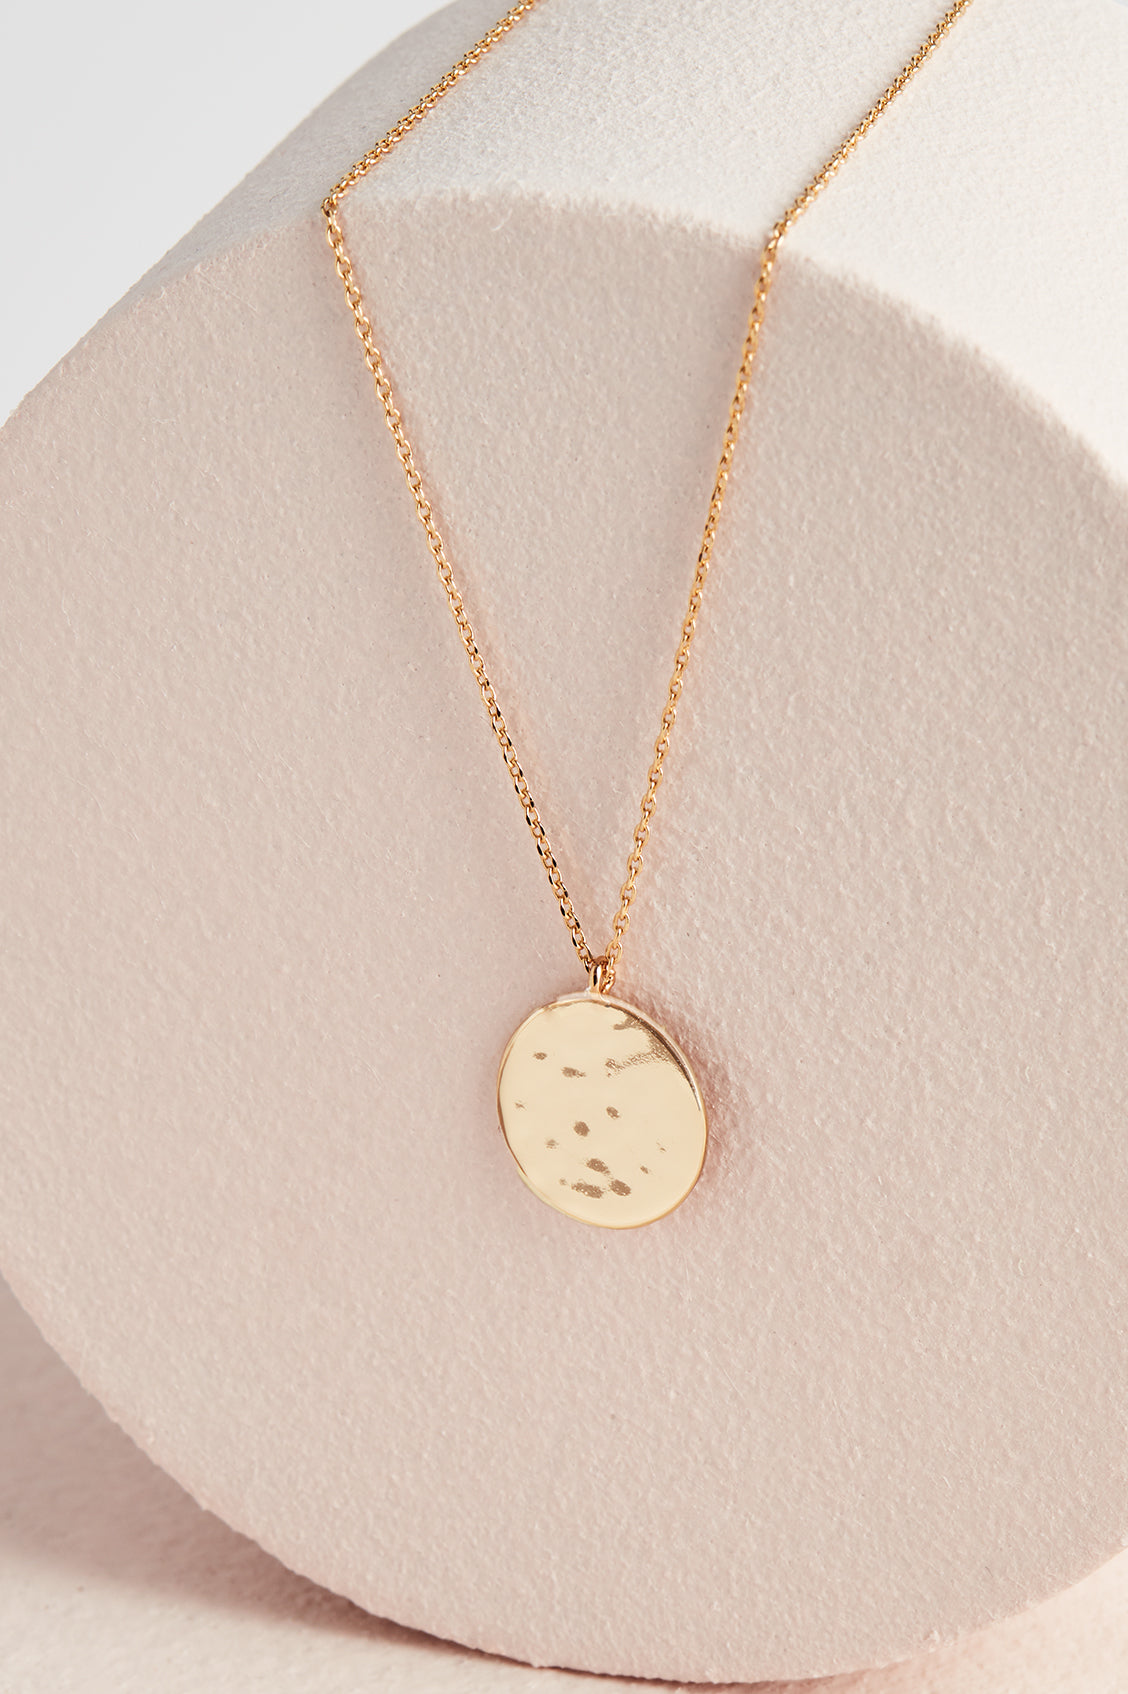 Gold Disc Necklace, 9 Carat Yellow Gold | G. W. Cox My Jeweller